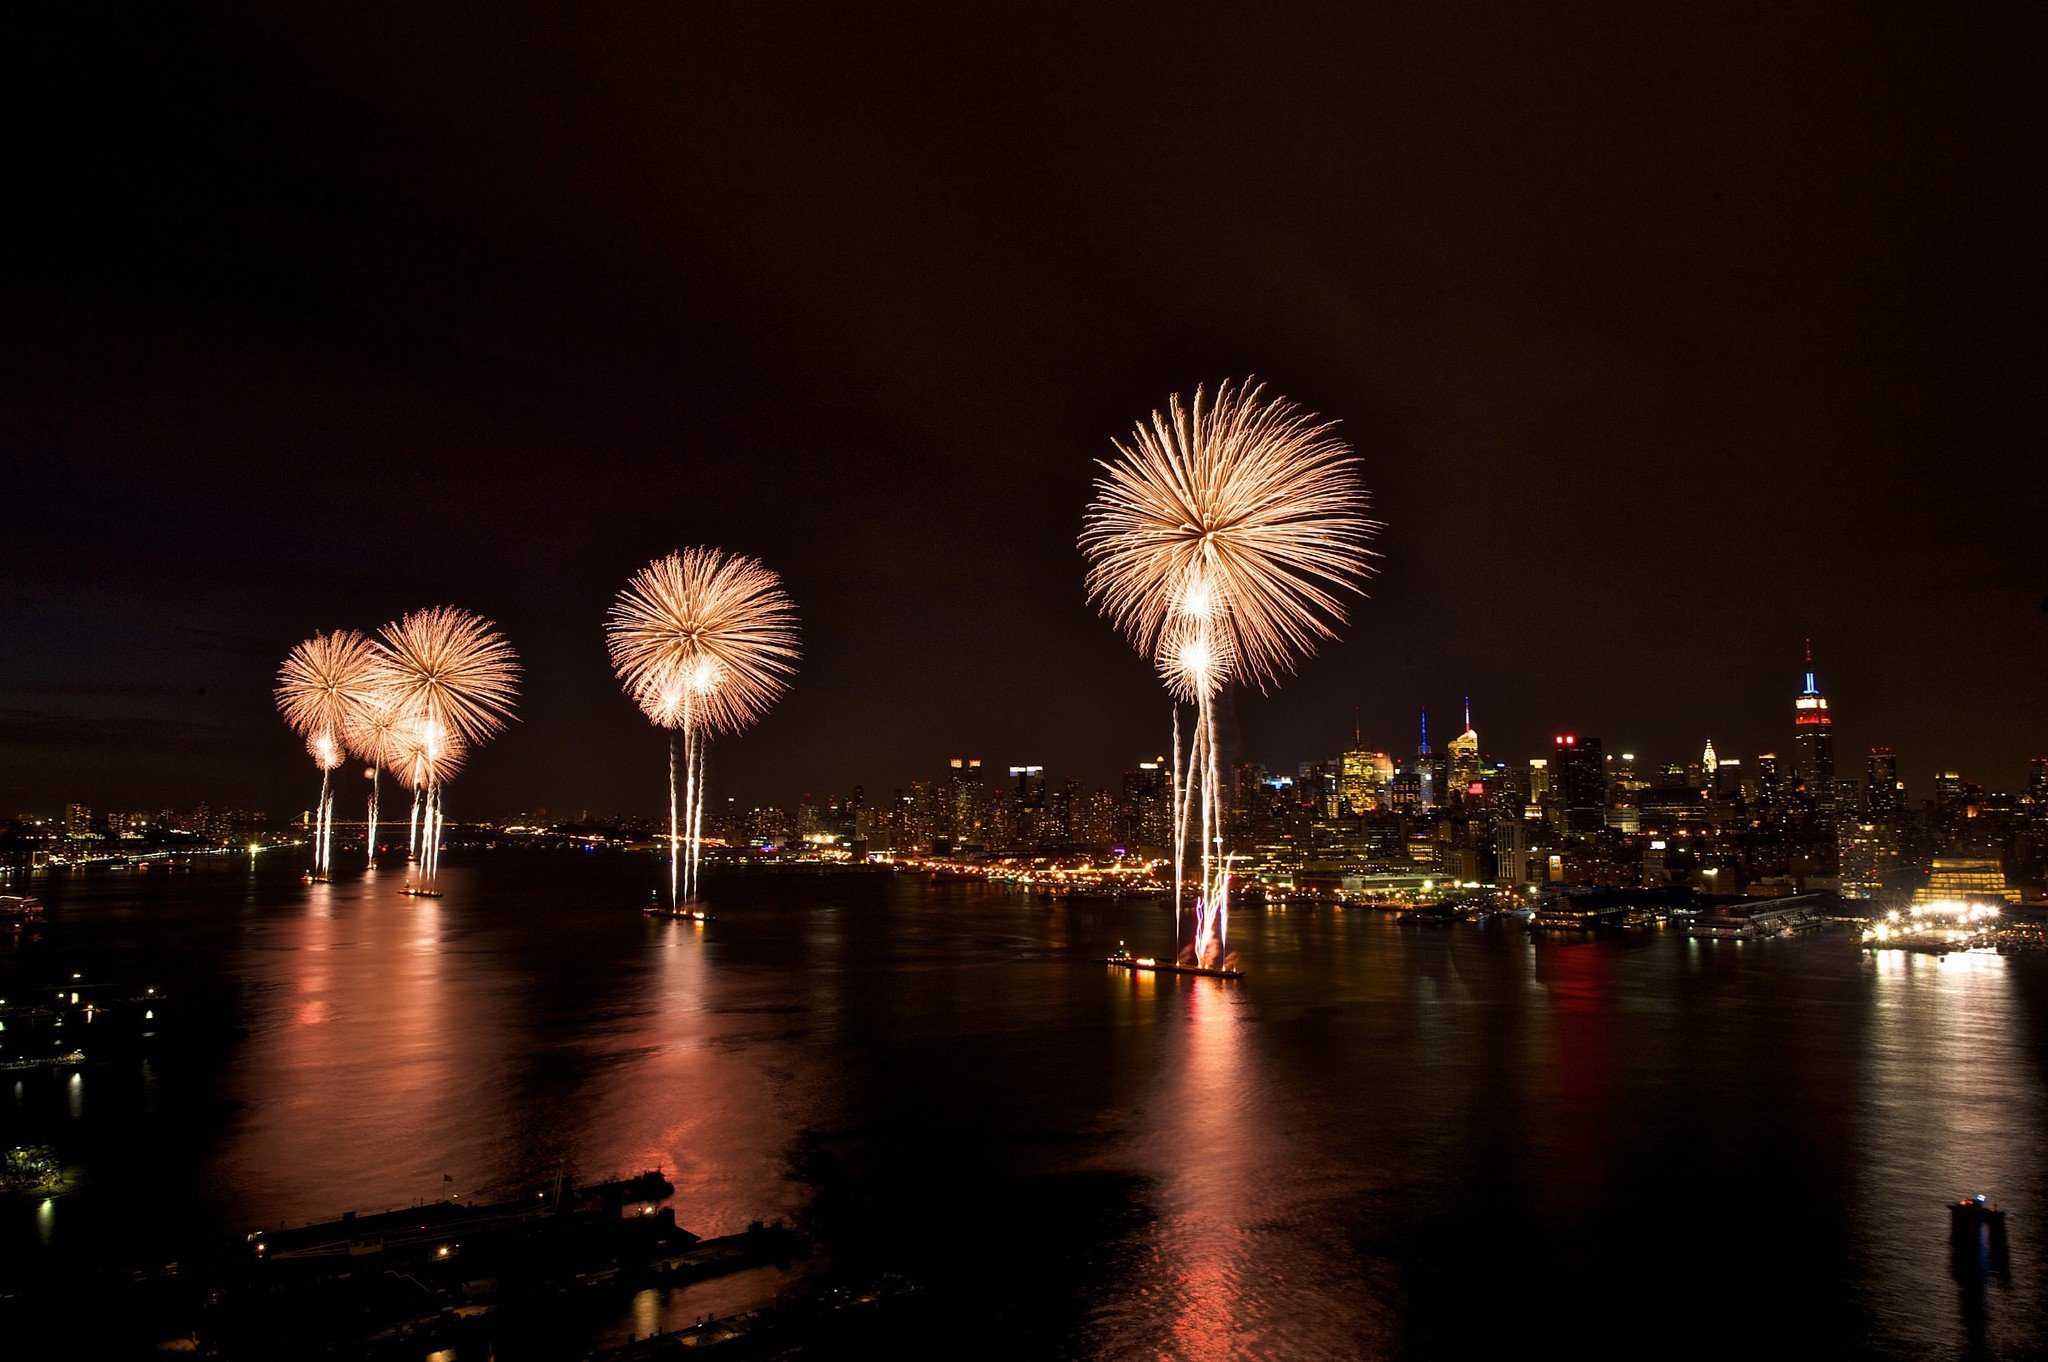 Nothing personal, Jersey: Macy's fireworks moving to the East River ...